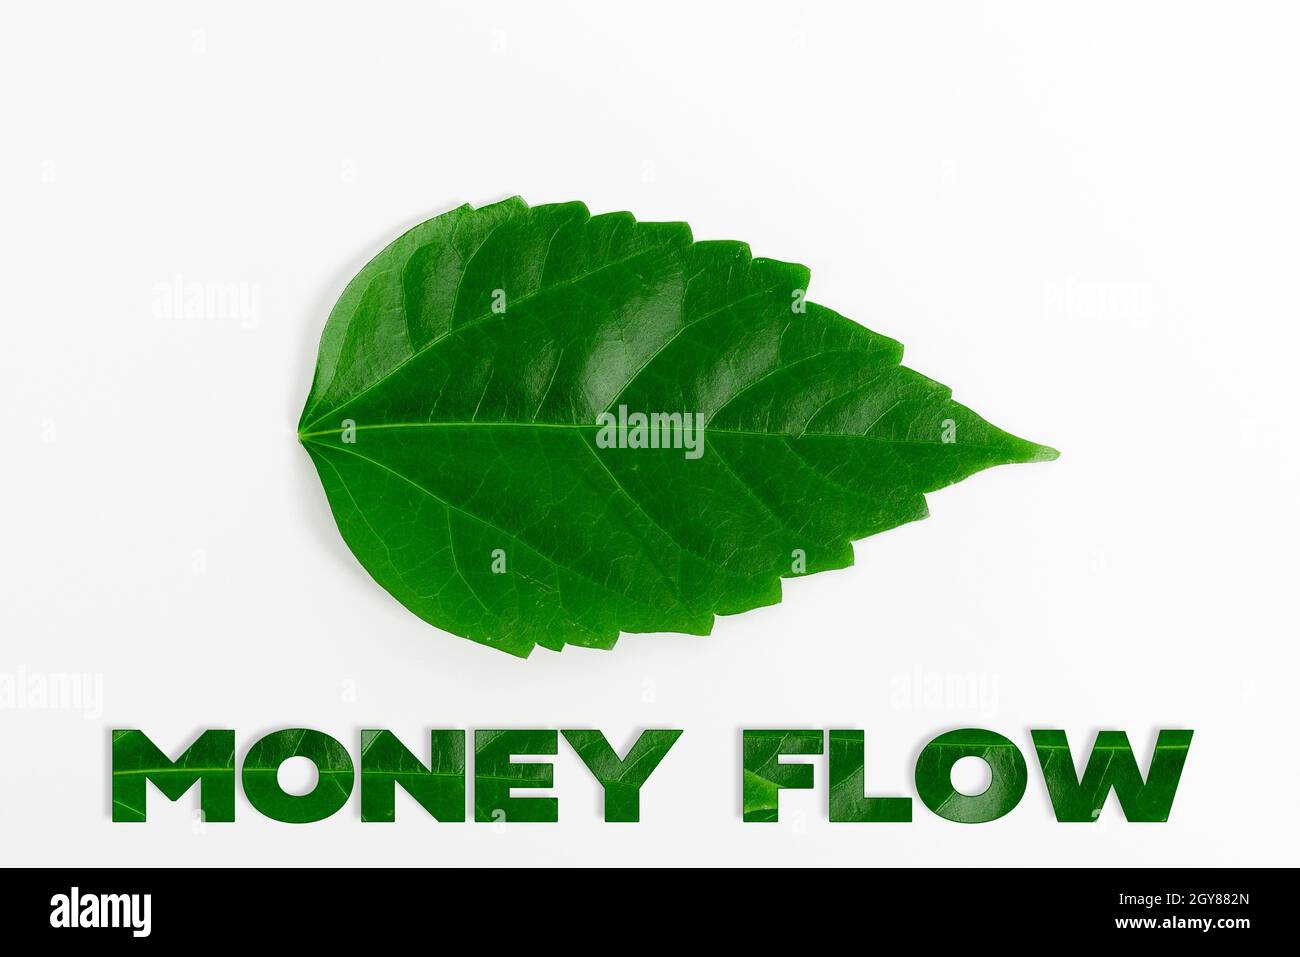 Text caption presenting Money Flow, Business approach it is an indicator of positive or negative in a current day Nature Conservation Ideas, New Envir Stock Photo